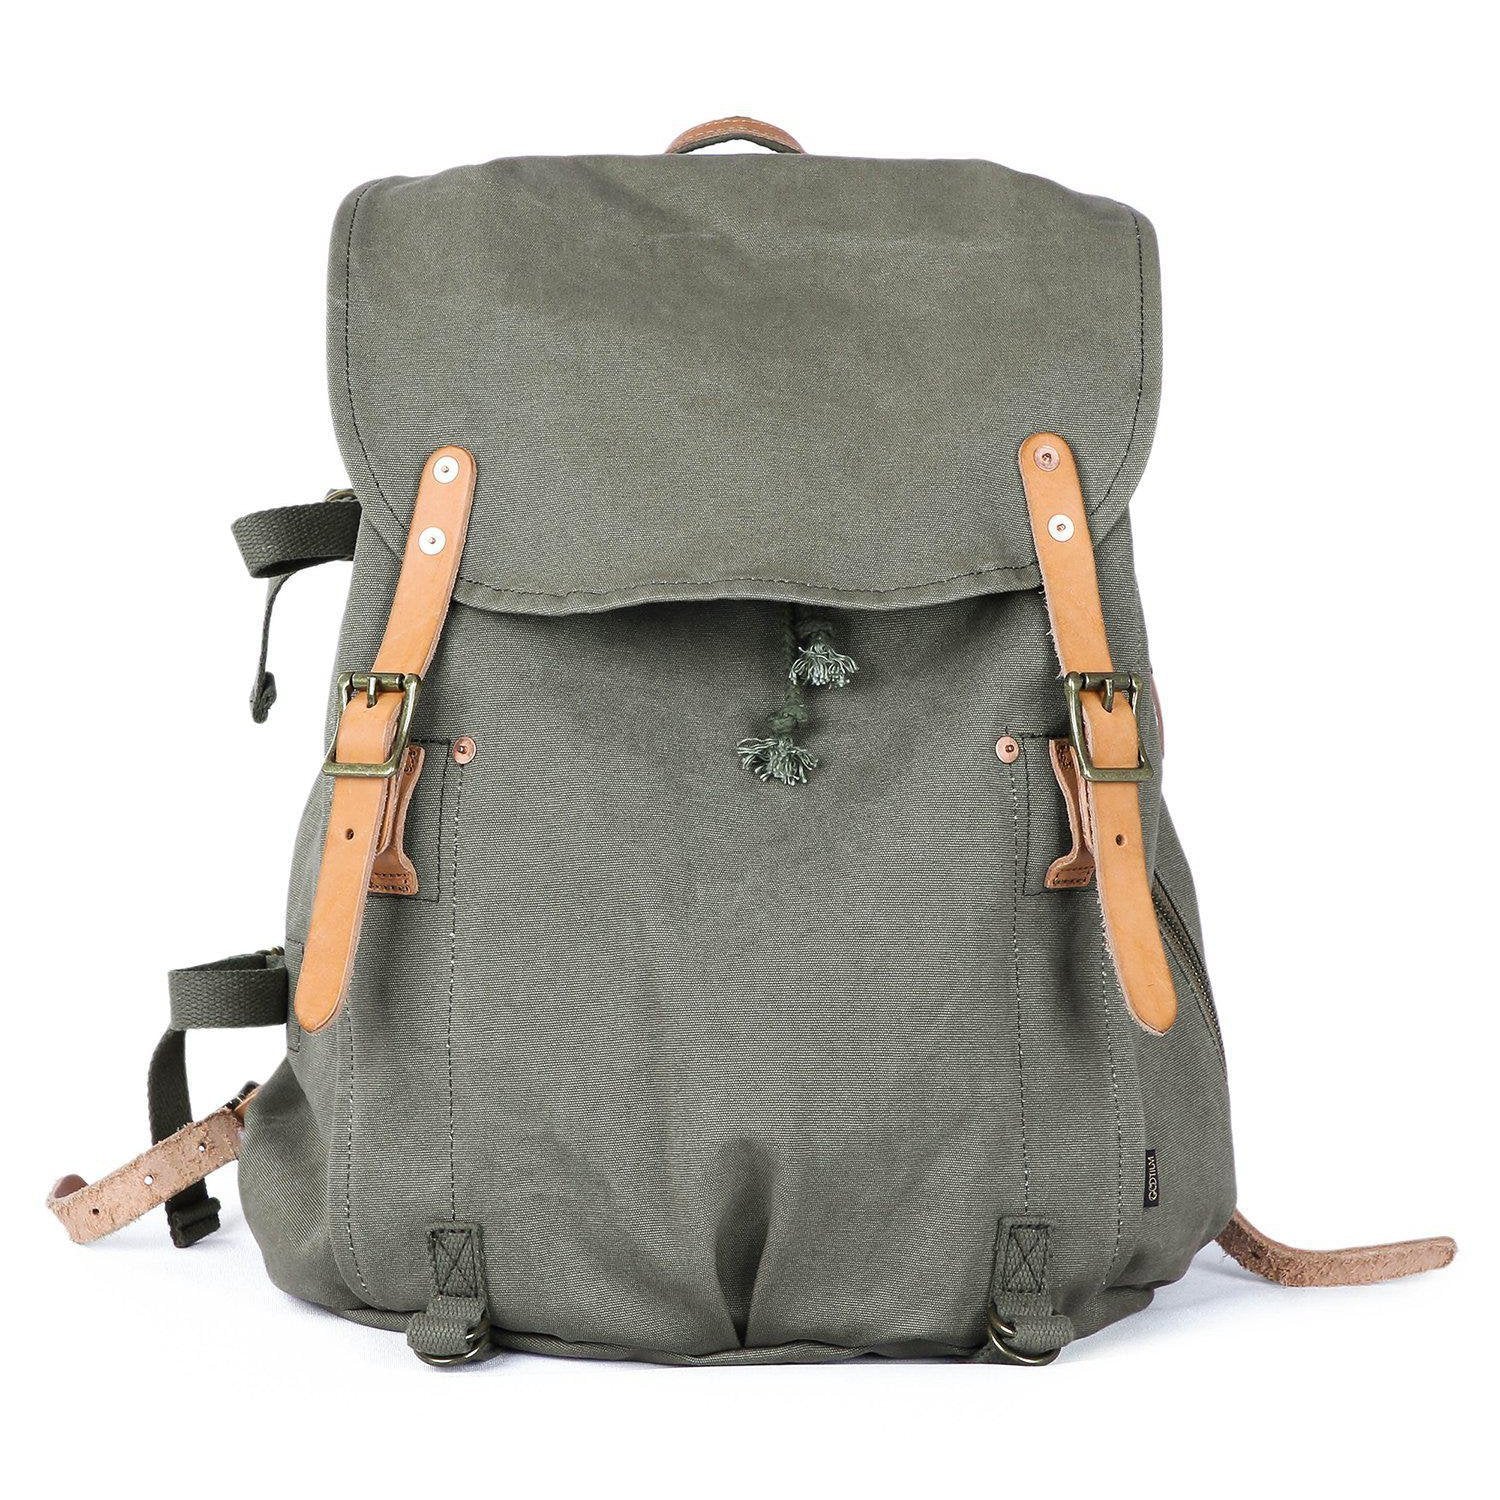 Army Green Canvas Hiking School Heavy Duty Rucksack Backpack with